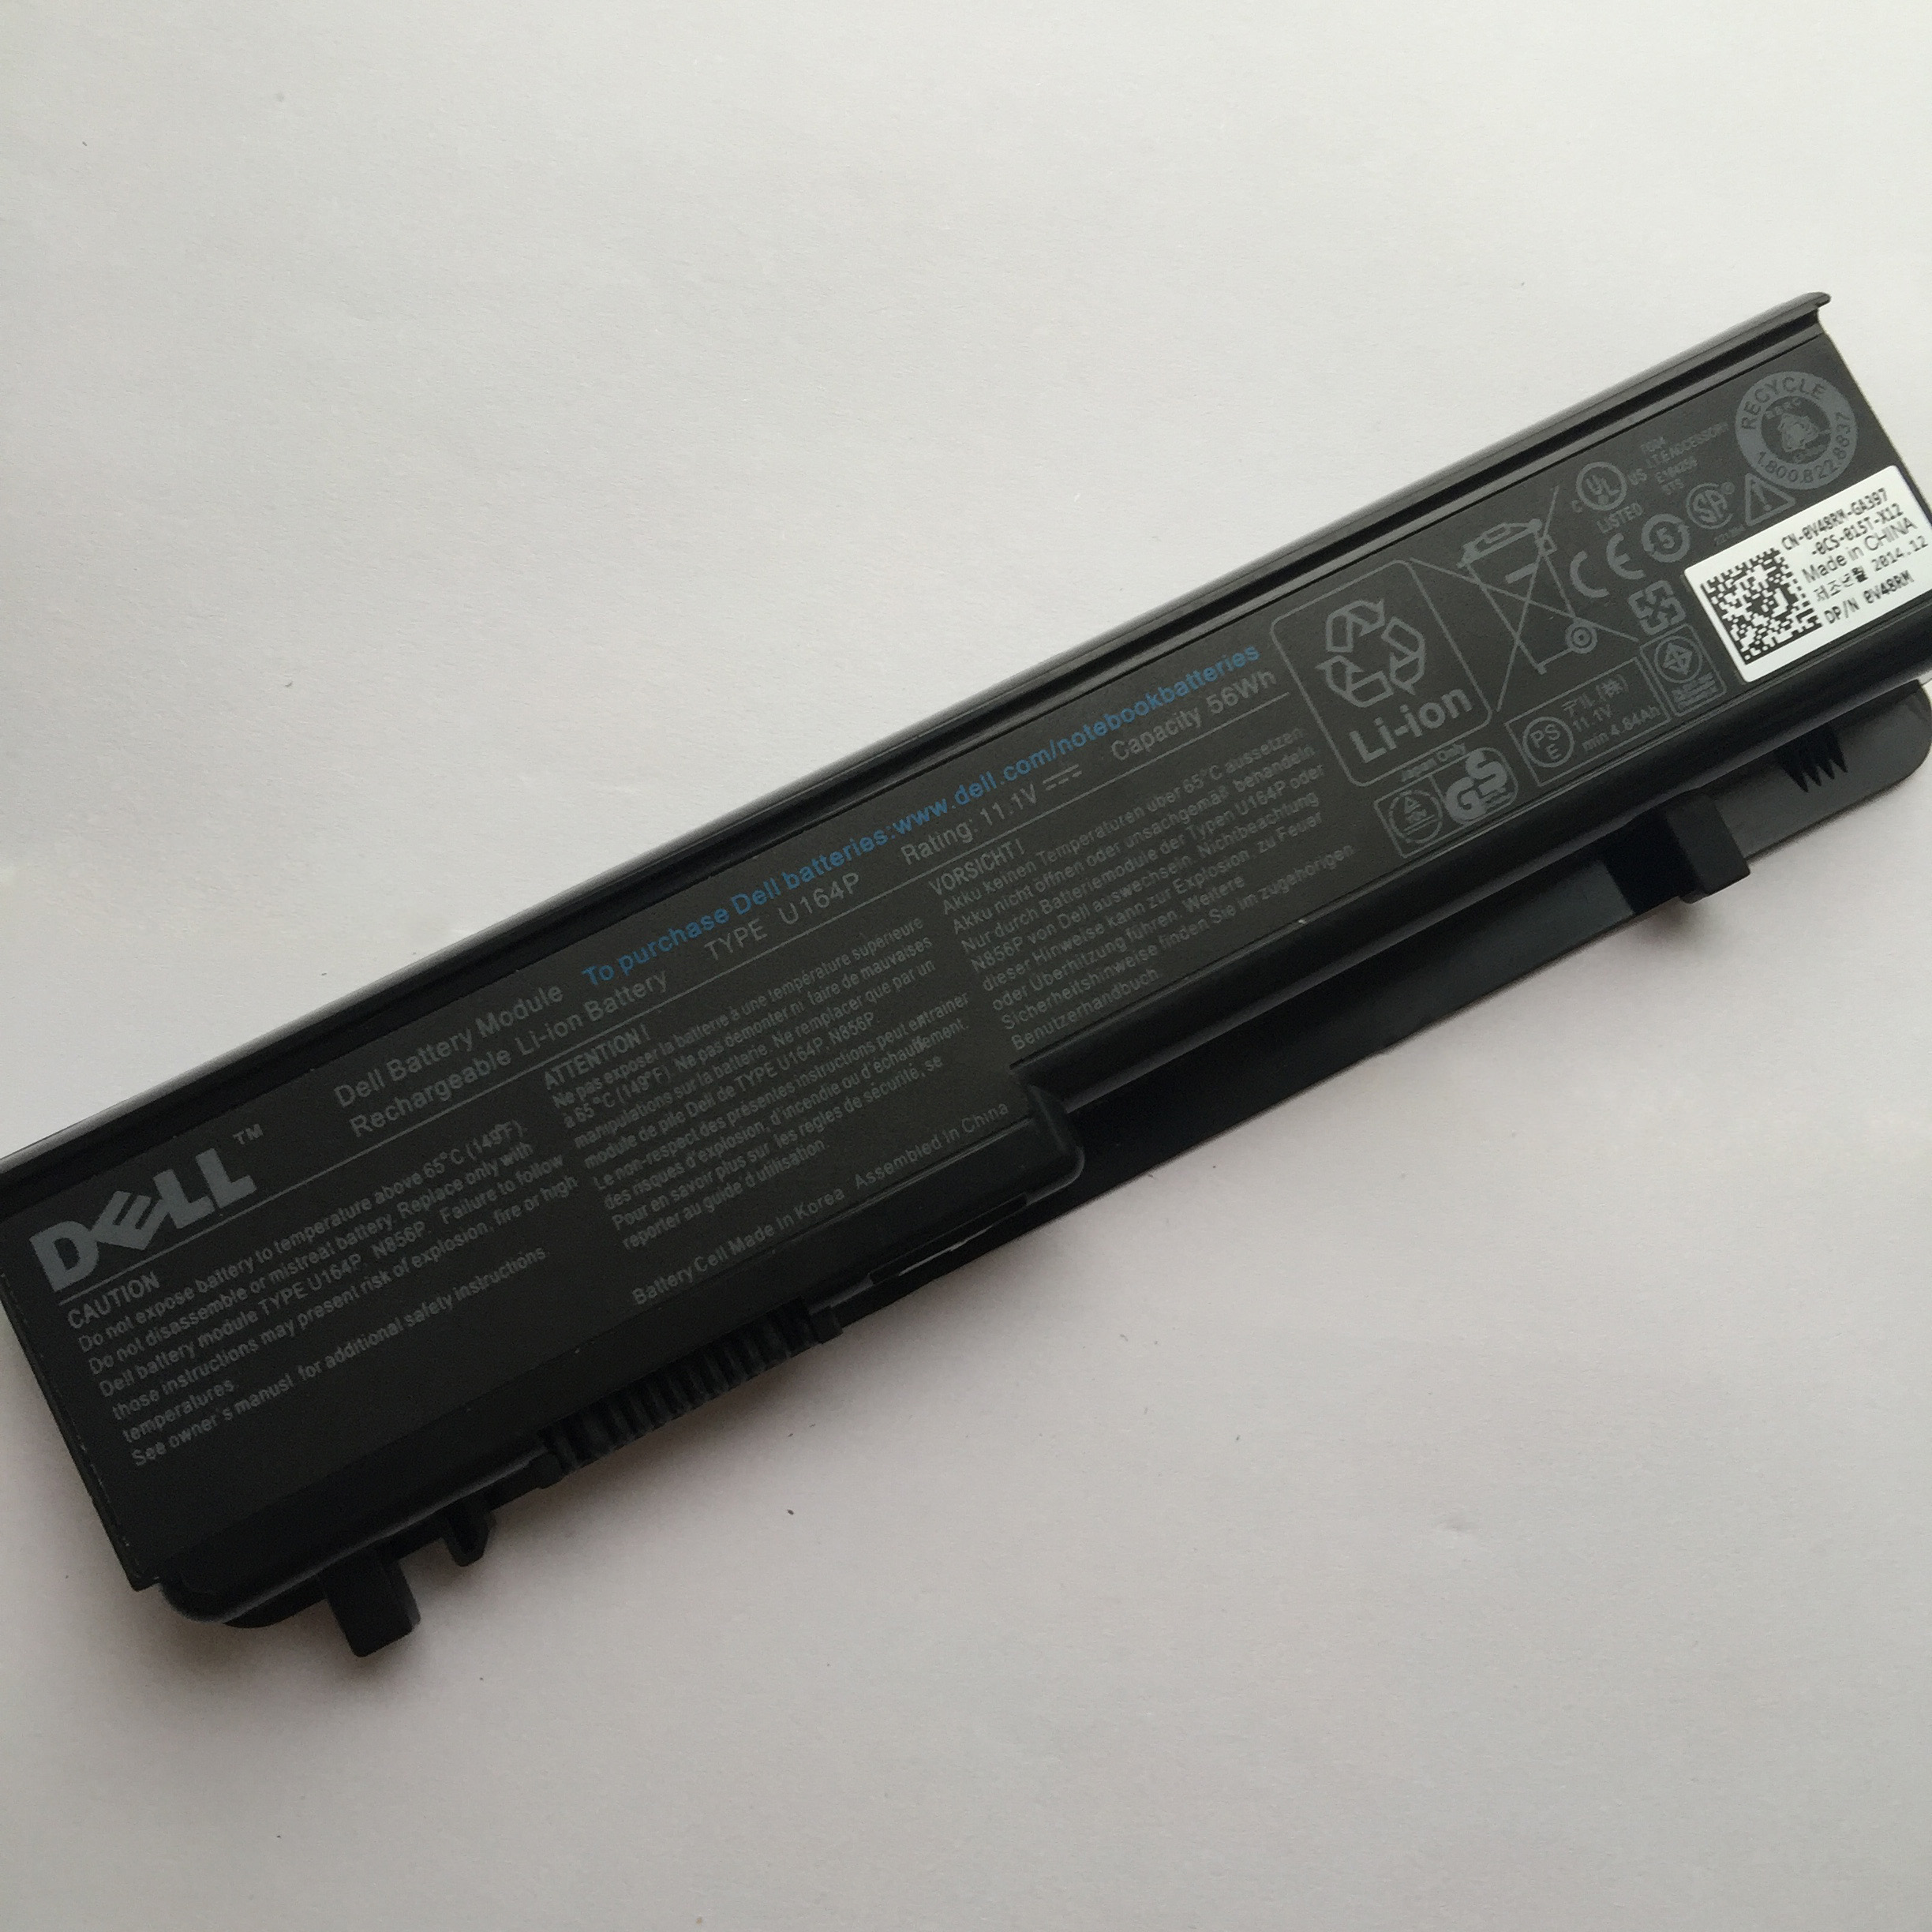 U164P rechargeable lithium ion Notebook battery Laptop battery OW077P/312-0186 /312-0196 / A3582354 11.1V 56Wh for Dell laptop Studio 1745 1747 1749